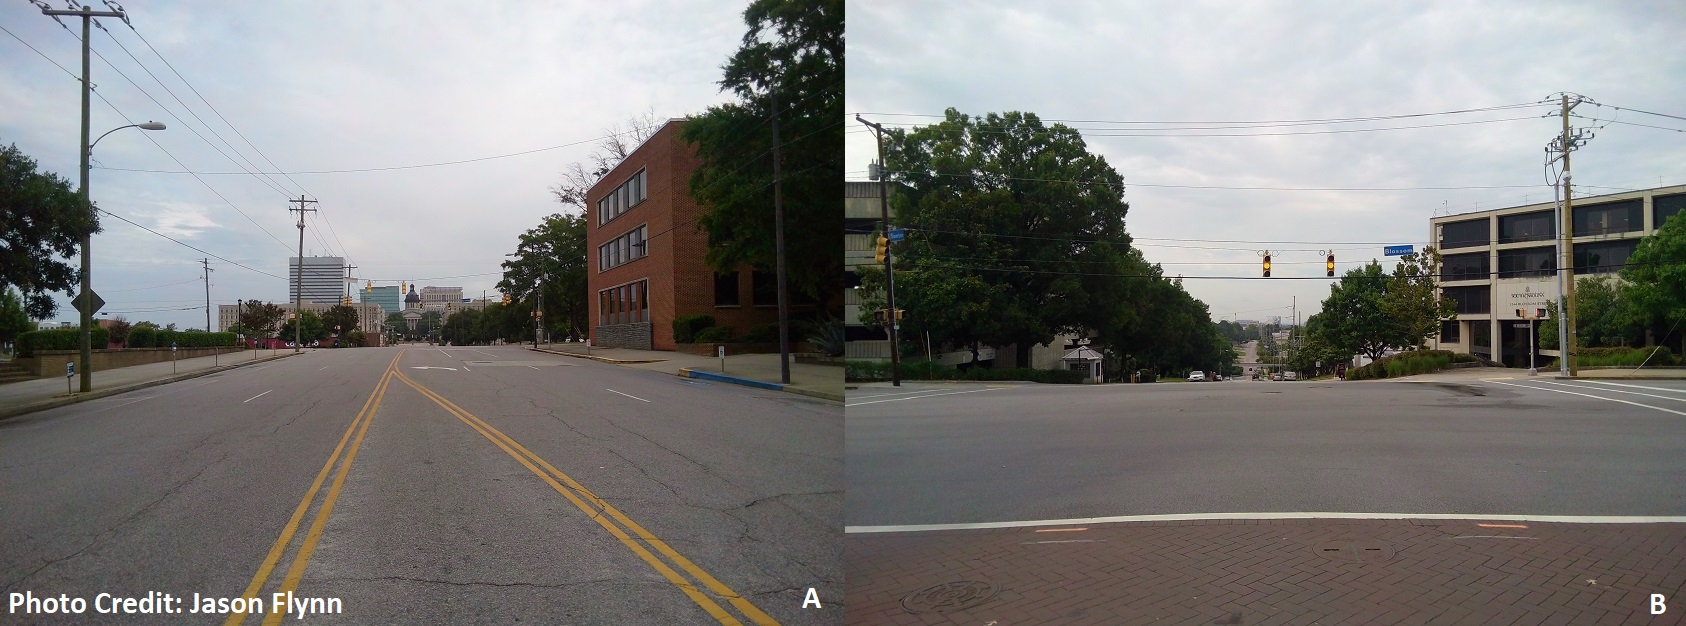 A)On Main St. in downtown Columbia, near the junction of the Piedmont and Coastal Plain. B)The opposite direction on Main St. with UofSC in the Coastal Plain in the distance that sits on land that was in, or near, what was once the edge of the ocean.